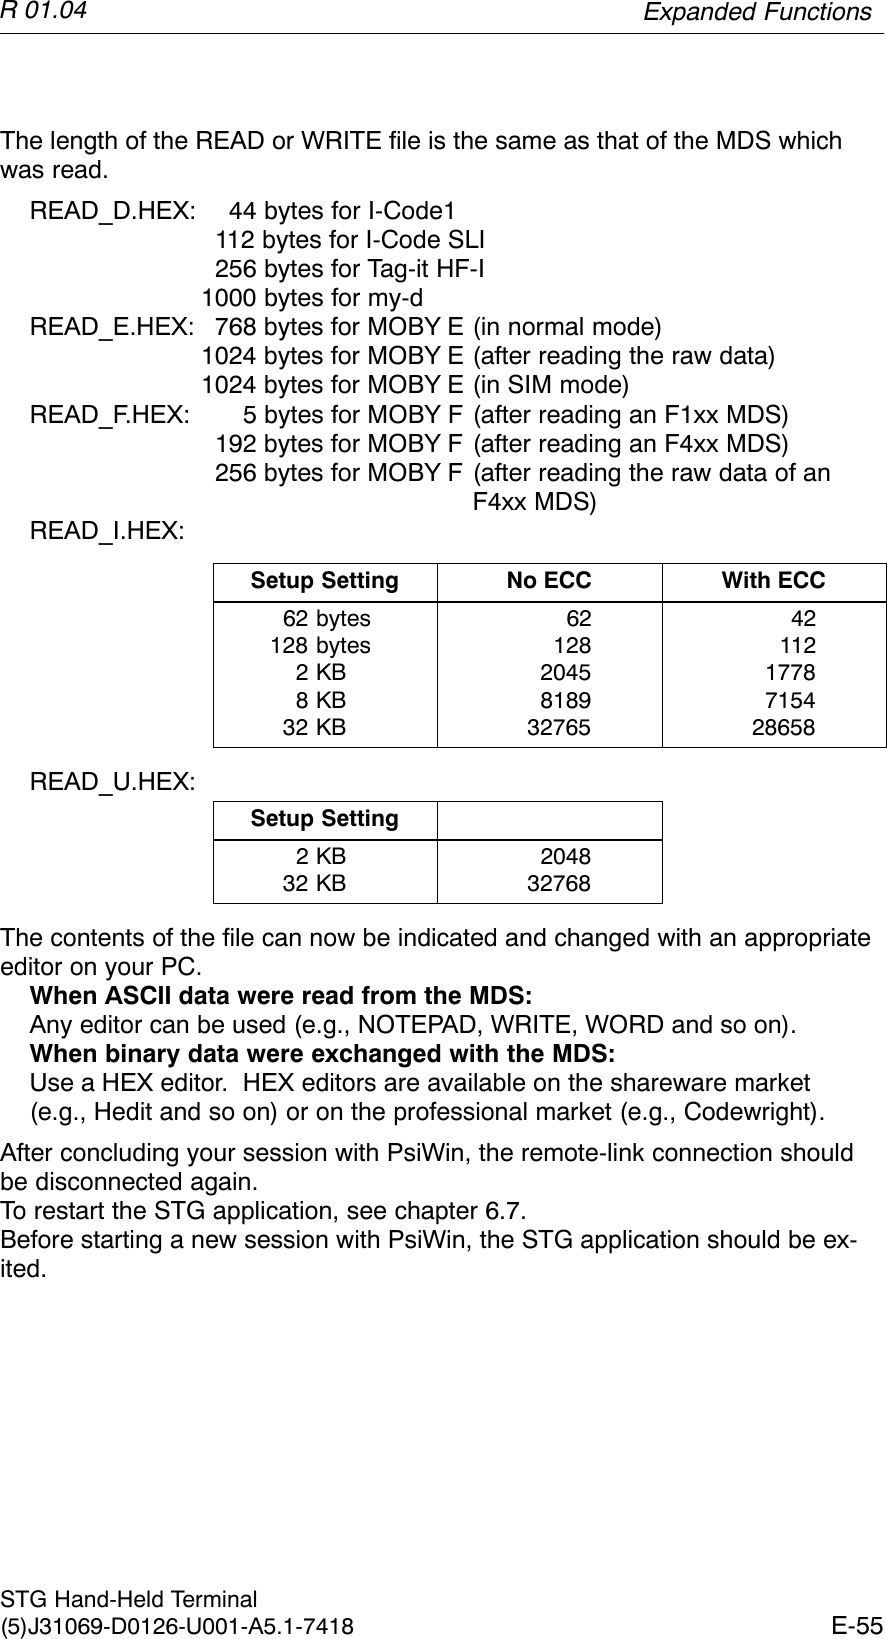 R 01.04E-55STG Hand-Held Terminal(5)J31069-D0126-U001-A5.1-7418The length of the READ or WRITE file is the same as that of the MDS whichwas read.READ_D.HEX: 44 bytes for I-Code1112 bytes for I-Code SLI256 bytes for Tag-it HF-I1000 bytes for my-dREAD_E.HEX: 768 bytes for MOBY E (in normal mode)1024 bytes for MOBY E (after reading the raw data)1024 bytes for MOBY E (in SIM mode)READ_F.HEX:  5 bytes for MOBY F (after reading an F1xx MDS)192 bytes for MOBY F (after reading an F4xx MDS)256 bytes for MOBY F (after reading the raw data of anF4xx MDS)READ_I.HEX:Setup Setting No ECC With ECC62 bytes128 bytes2 KB8 KB32 KB621282045818932765421121778715428658READ_U.HEX:Setup Setting2 KB32 KB204832768The contents of the file can now be indicated and changed with an appropriateeditor on your PC.When ASCII data were read from the MDS:Any editor can be used (e.g., NOTEPAD, WRITE, WORD and so on).When binary data were exchanged with the MDS:Use a HEX editor.  HEX editors are available on the shareware market (e.g., Hedit and so on) or on the professional market (e.g., Codewright).After concluding your session with PsiWin, the remote-link connection shouldbe disconnected again.To restart the STG application, see chapter 6.7.Before starting a new session with PsiWin, the STG application should be ex-ited.Expanded Functions